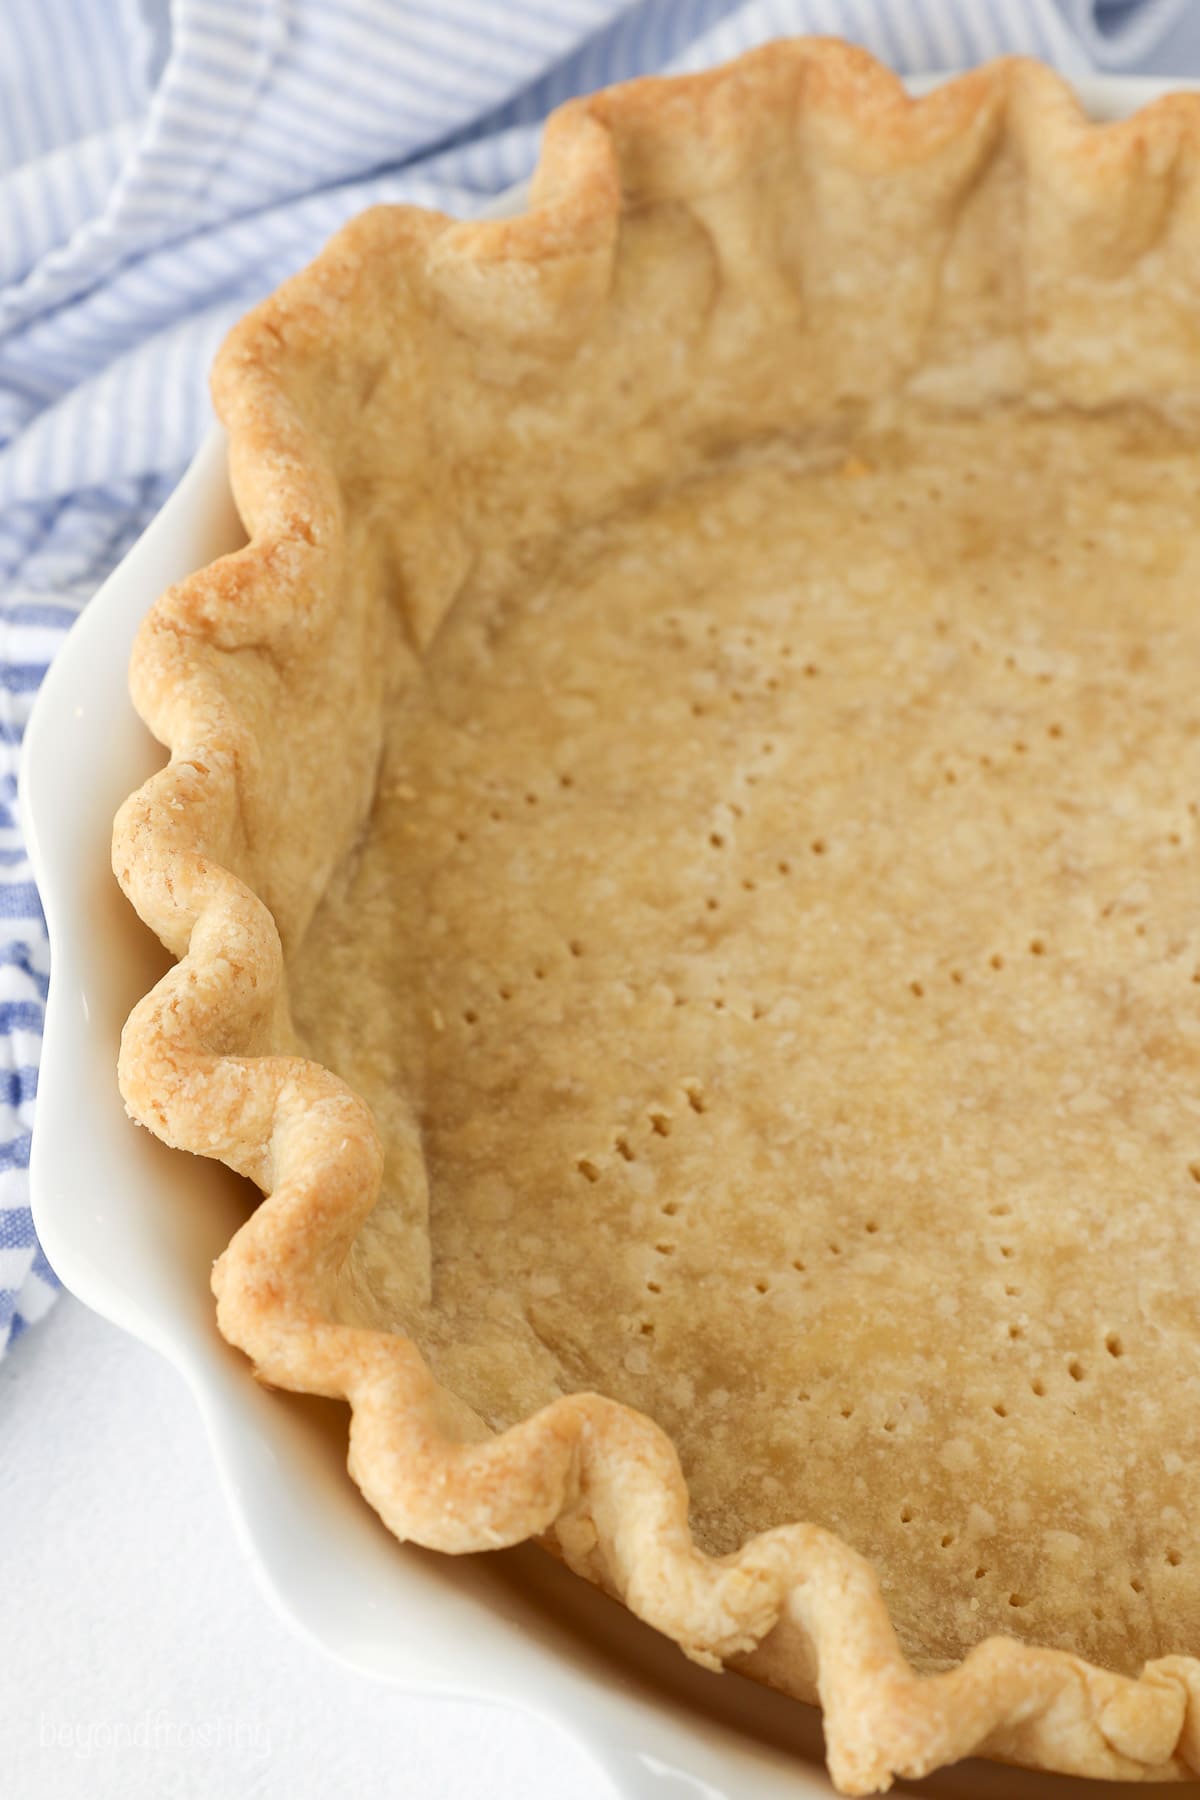 A fully baked pie crust in a pie plate.